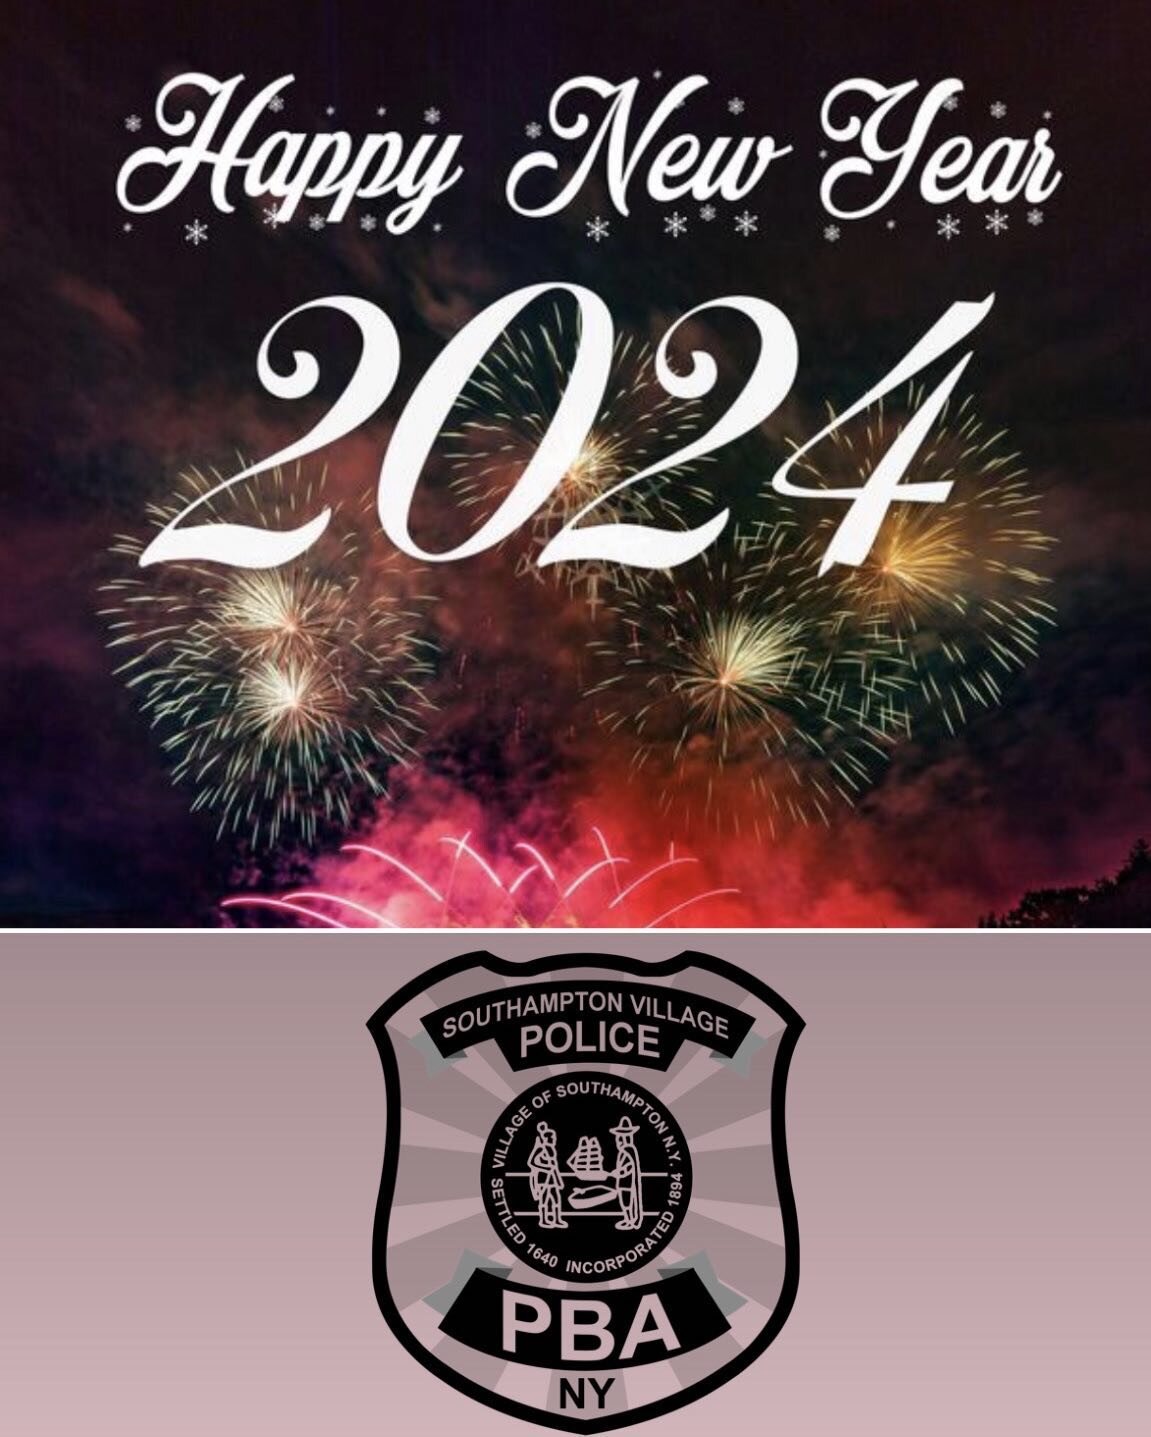 The Members of The Southampton Village PBA want to wish everyone a Happy, Safe, and Healthy New Year! We thank our Community and beyond for your support! We look forward to another great year in 2024!